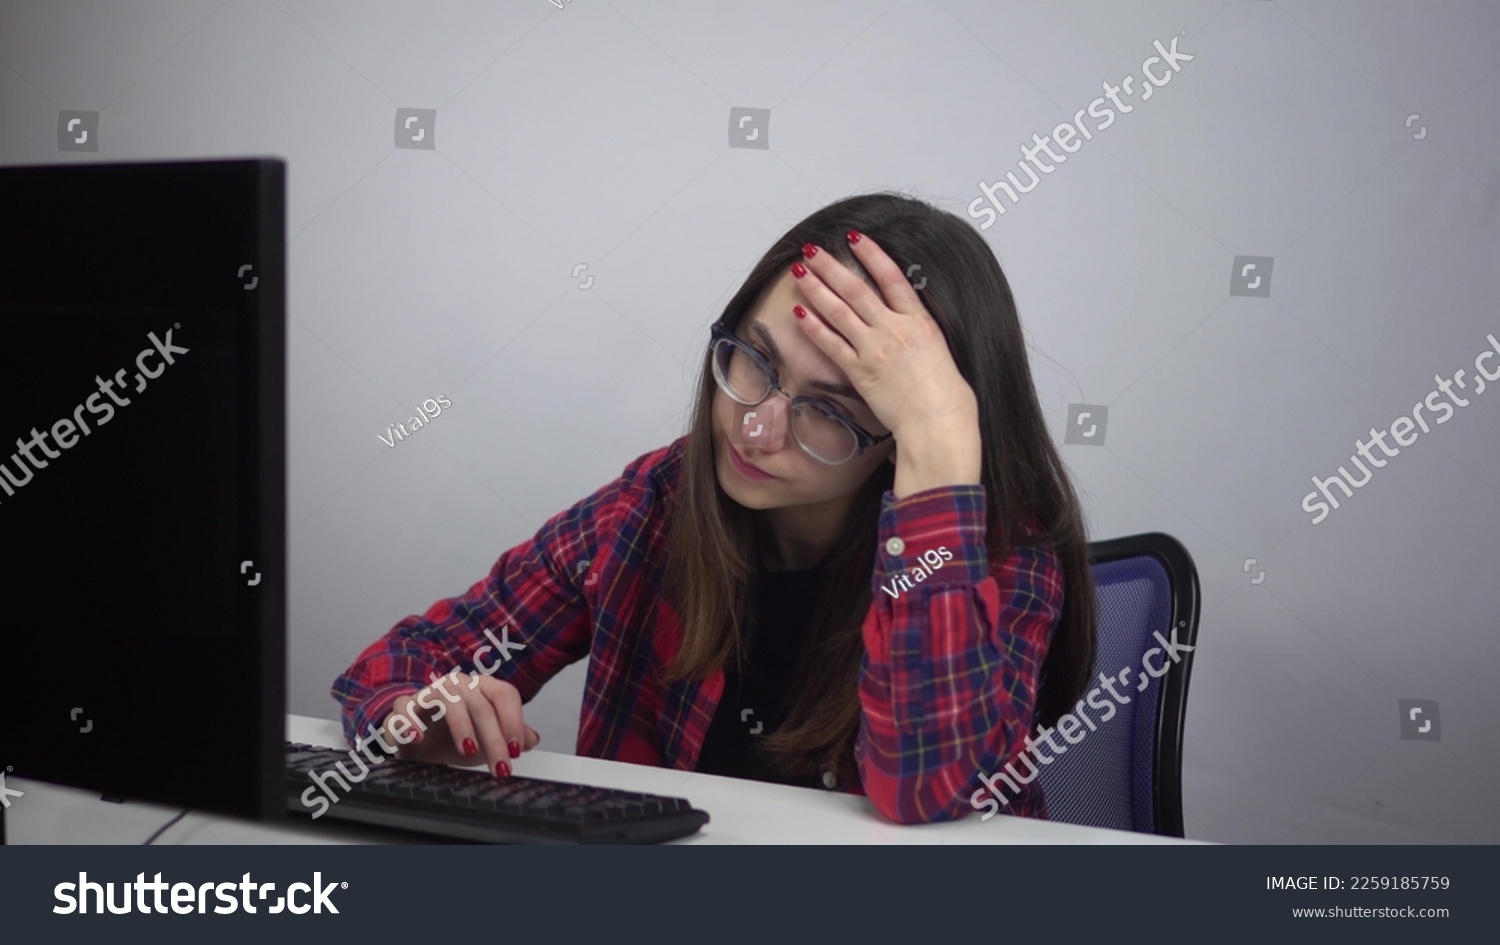 An IT specialist sits wearily in the office in front of a computer. A young girl lazily types on the keyboard. Girl with glasses and a red shirt. #2259185759